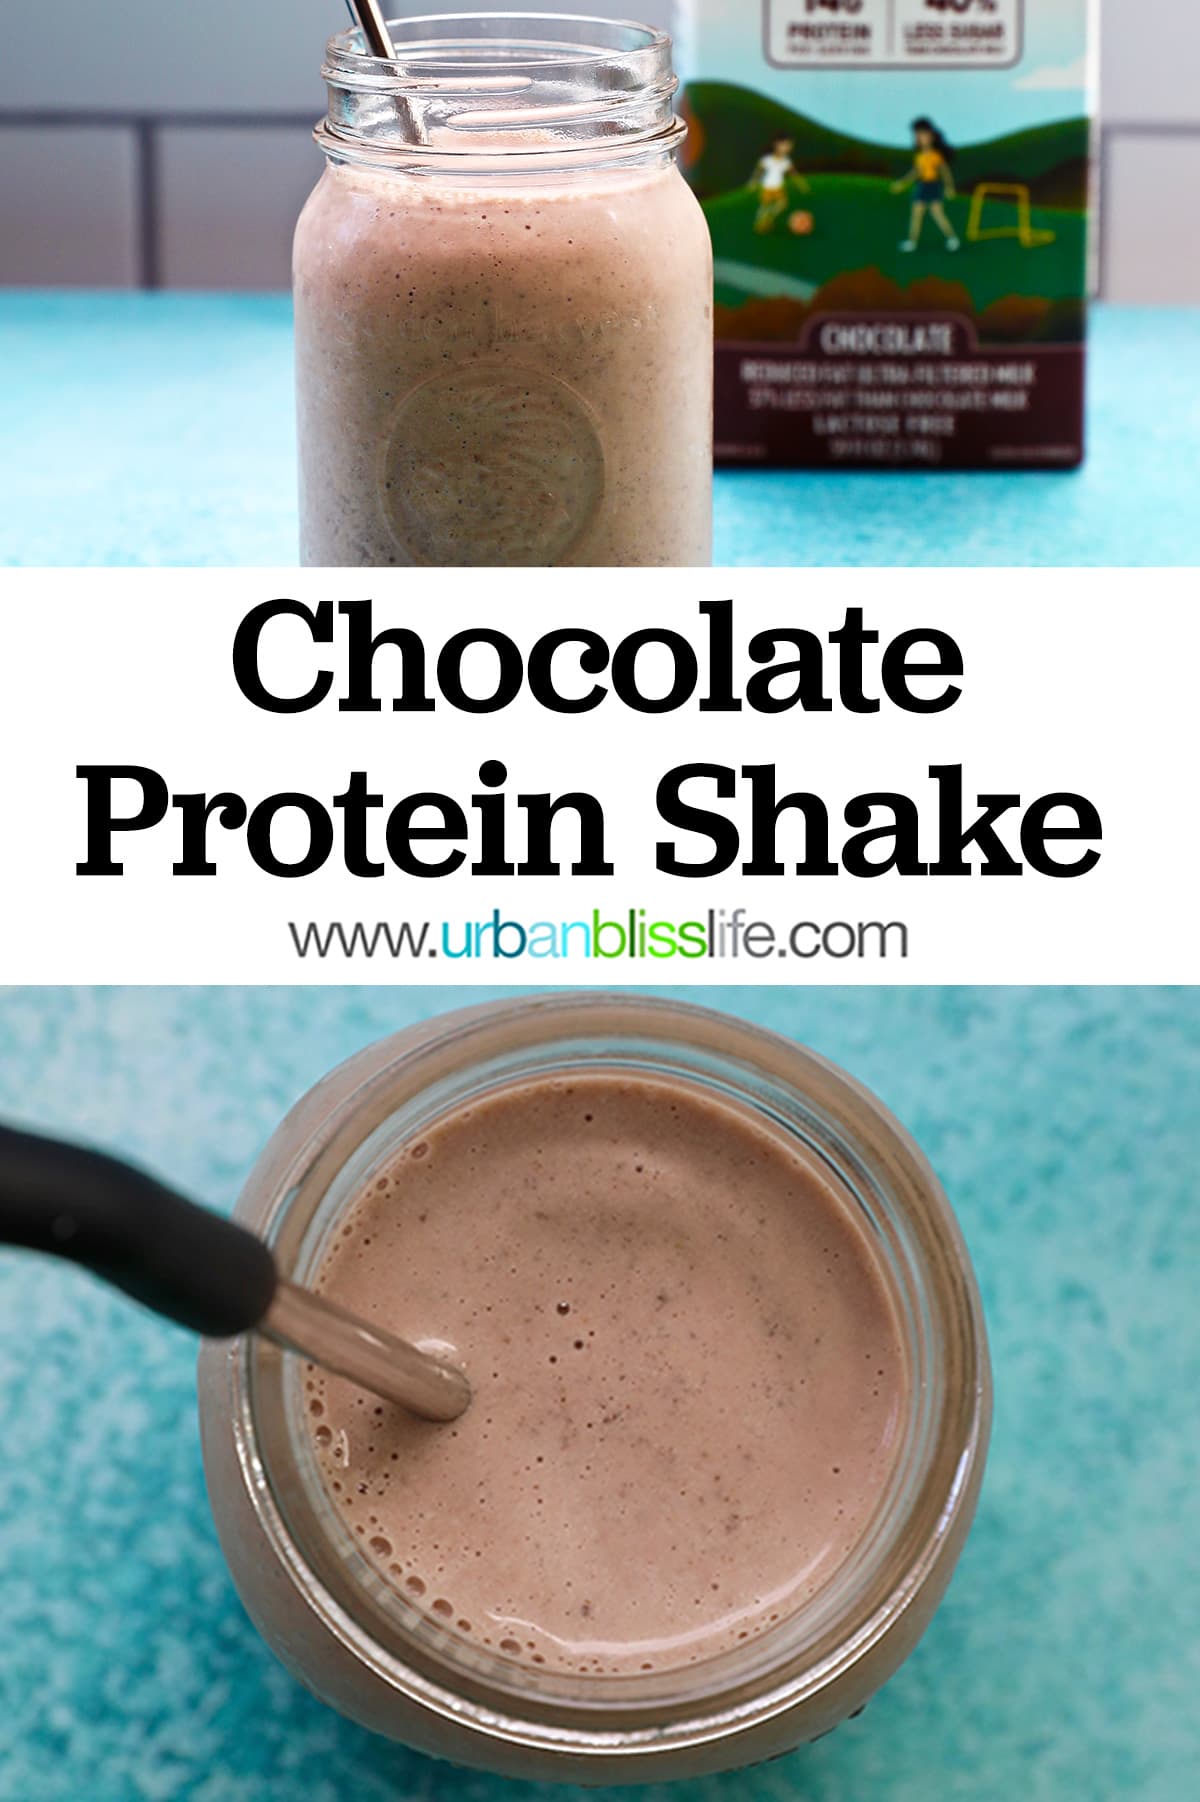 Chocolate milk vs. protein shake: Which is better after a workout